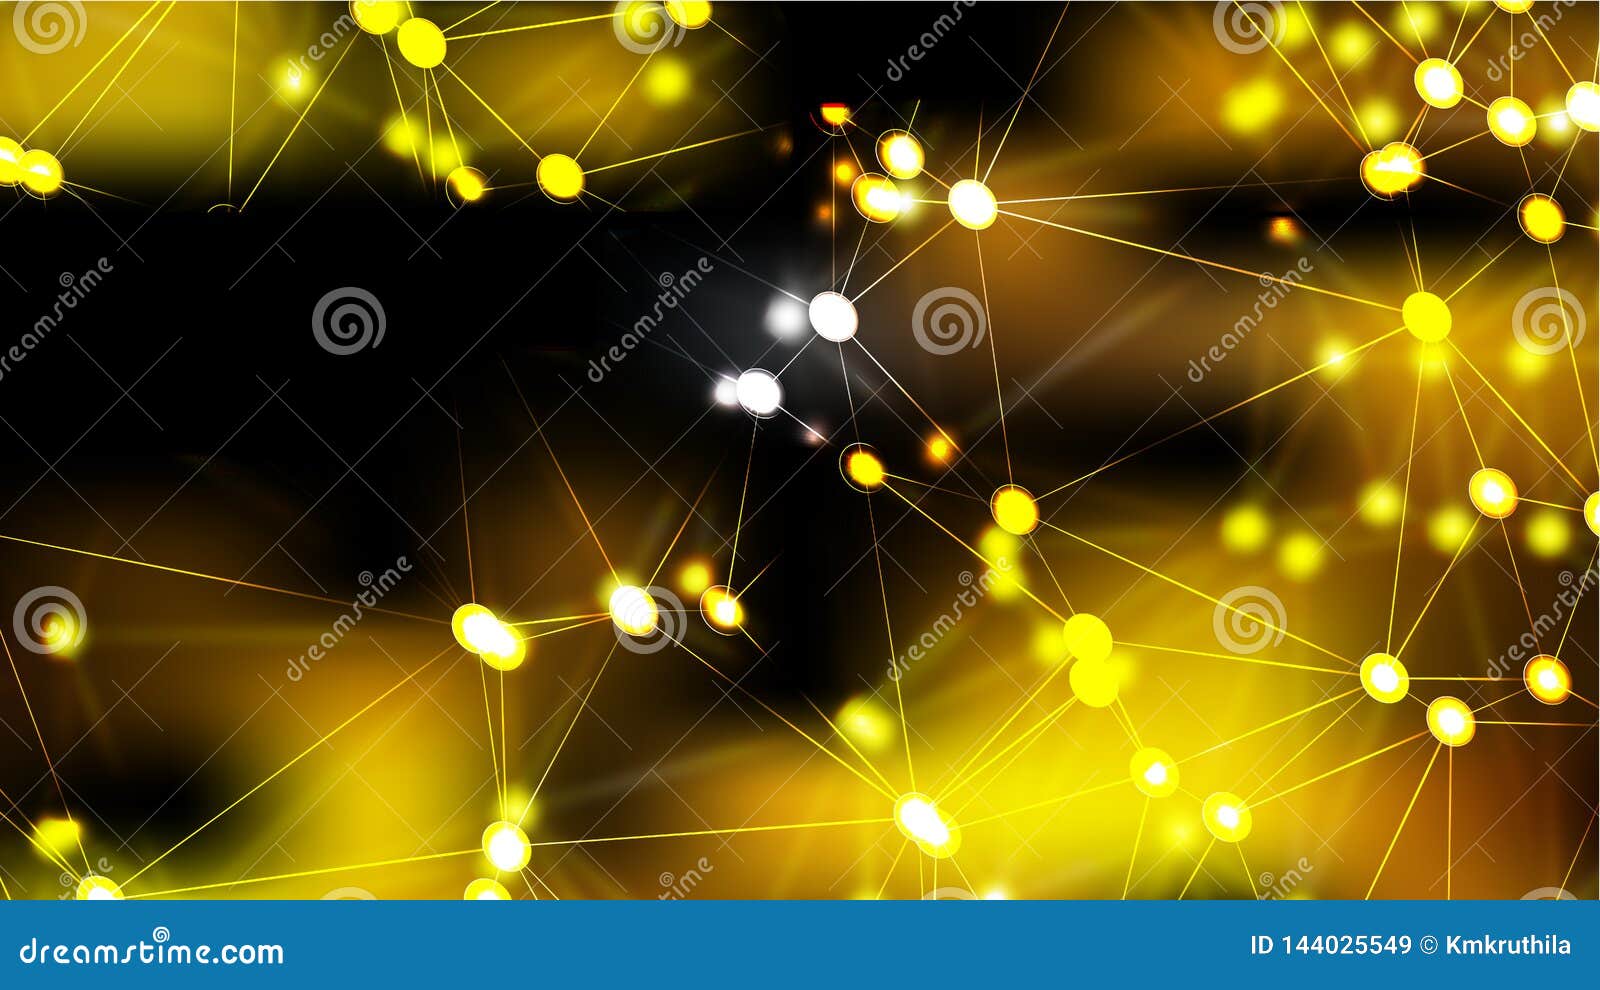 connecting dots and lines black and gold abstract background